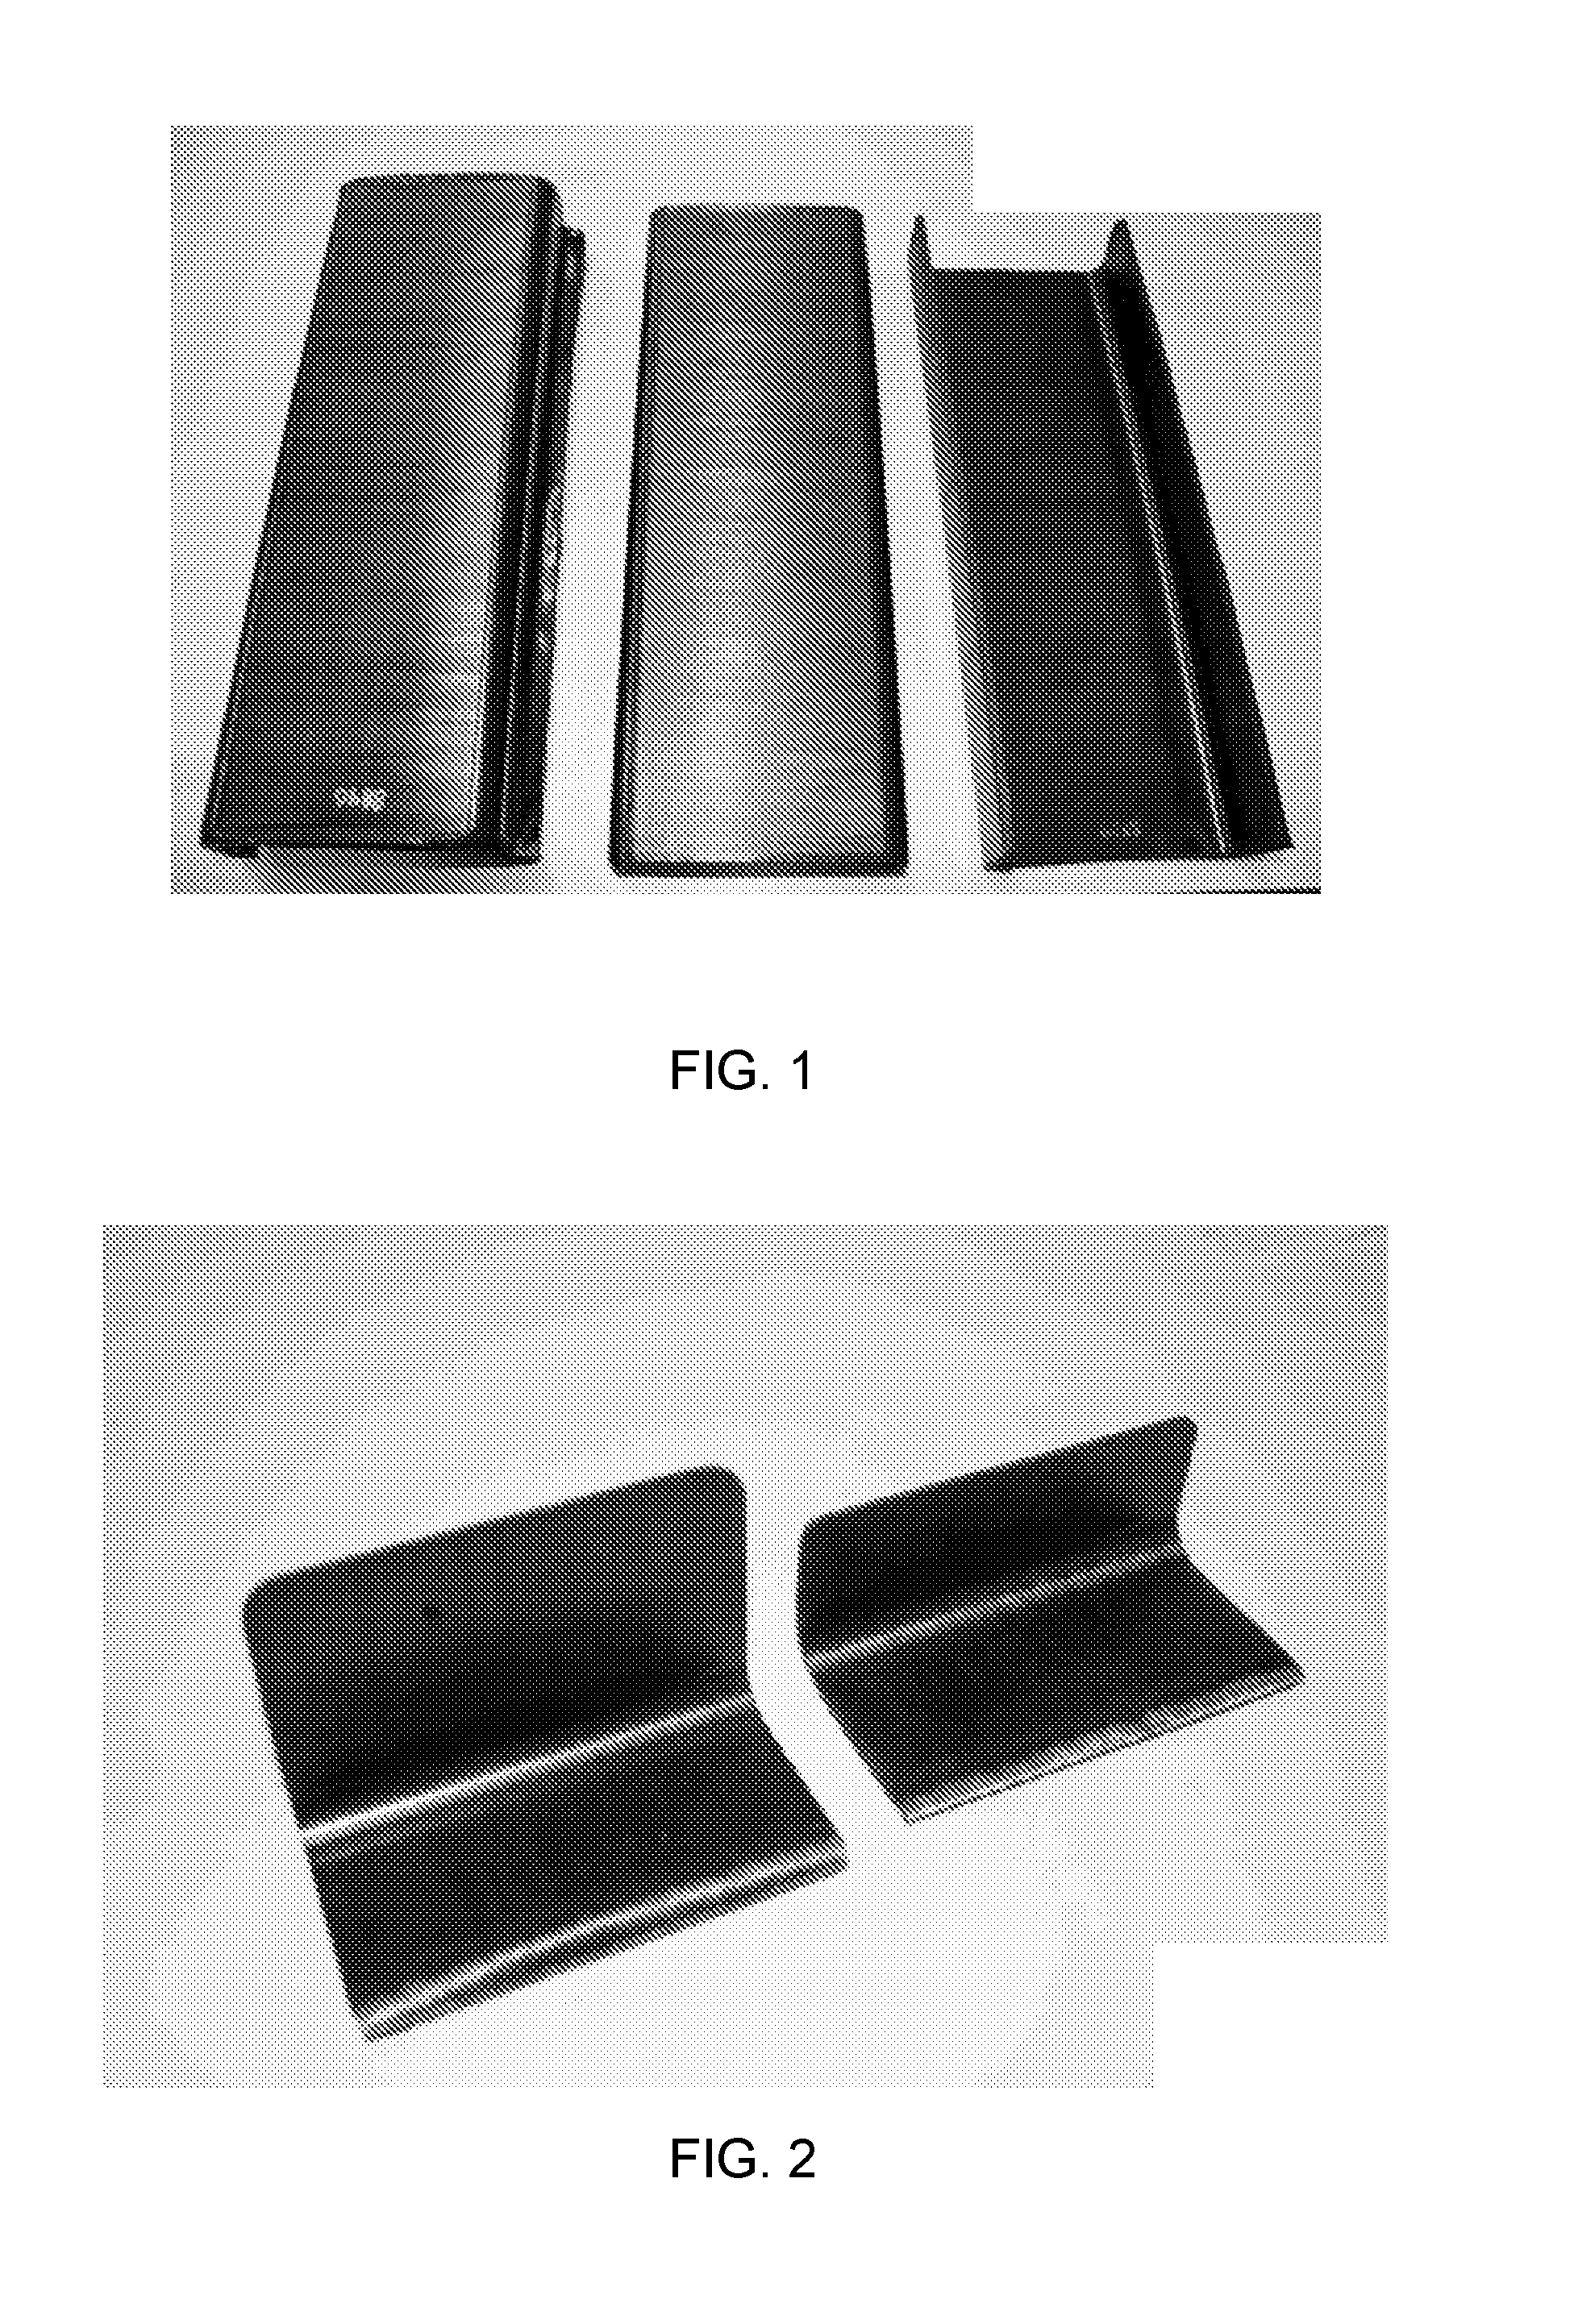 Load-bearing structures for aircraft engines and processes therefor